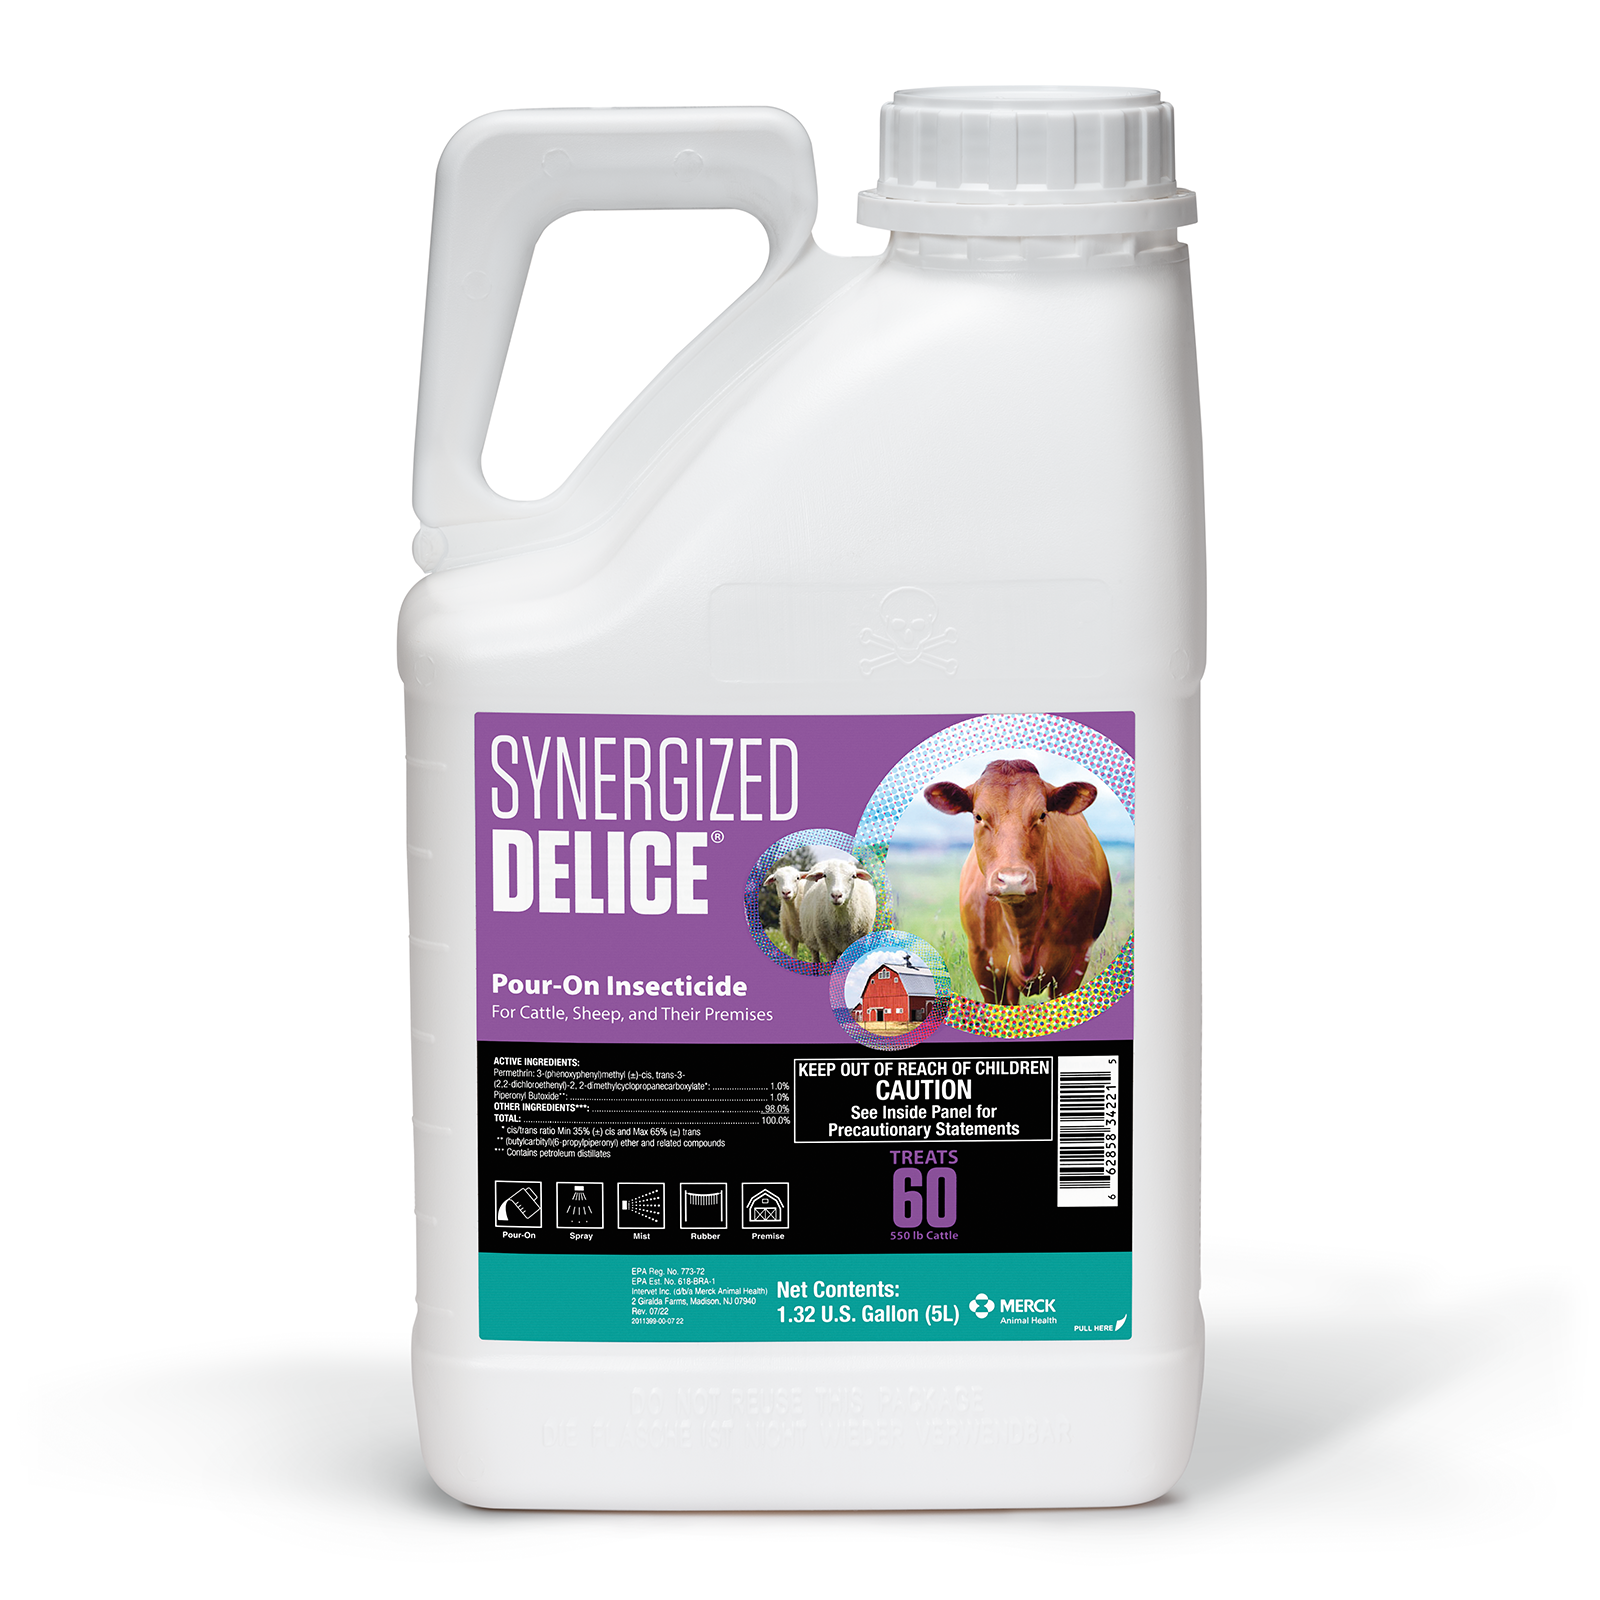 https://www.merck-animal-health-usa.com/wp-content/uploads/sites/54/2020/07/SYNERGIZED-DELICE%C2%AE-POUR-ON-INSECTICIDE-GALLON-product-image-1600x1600-1.png